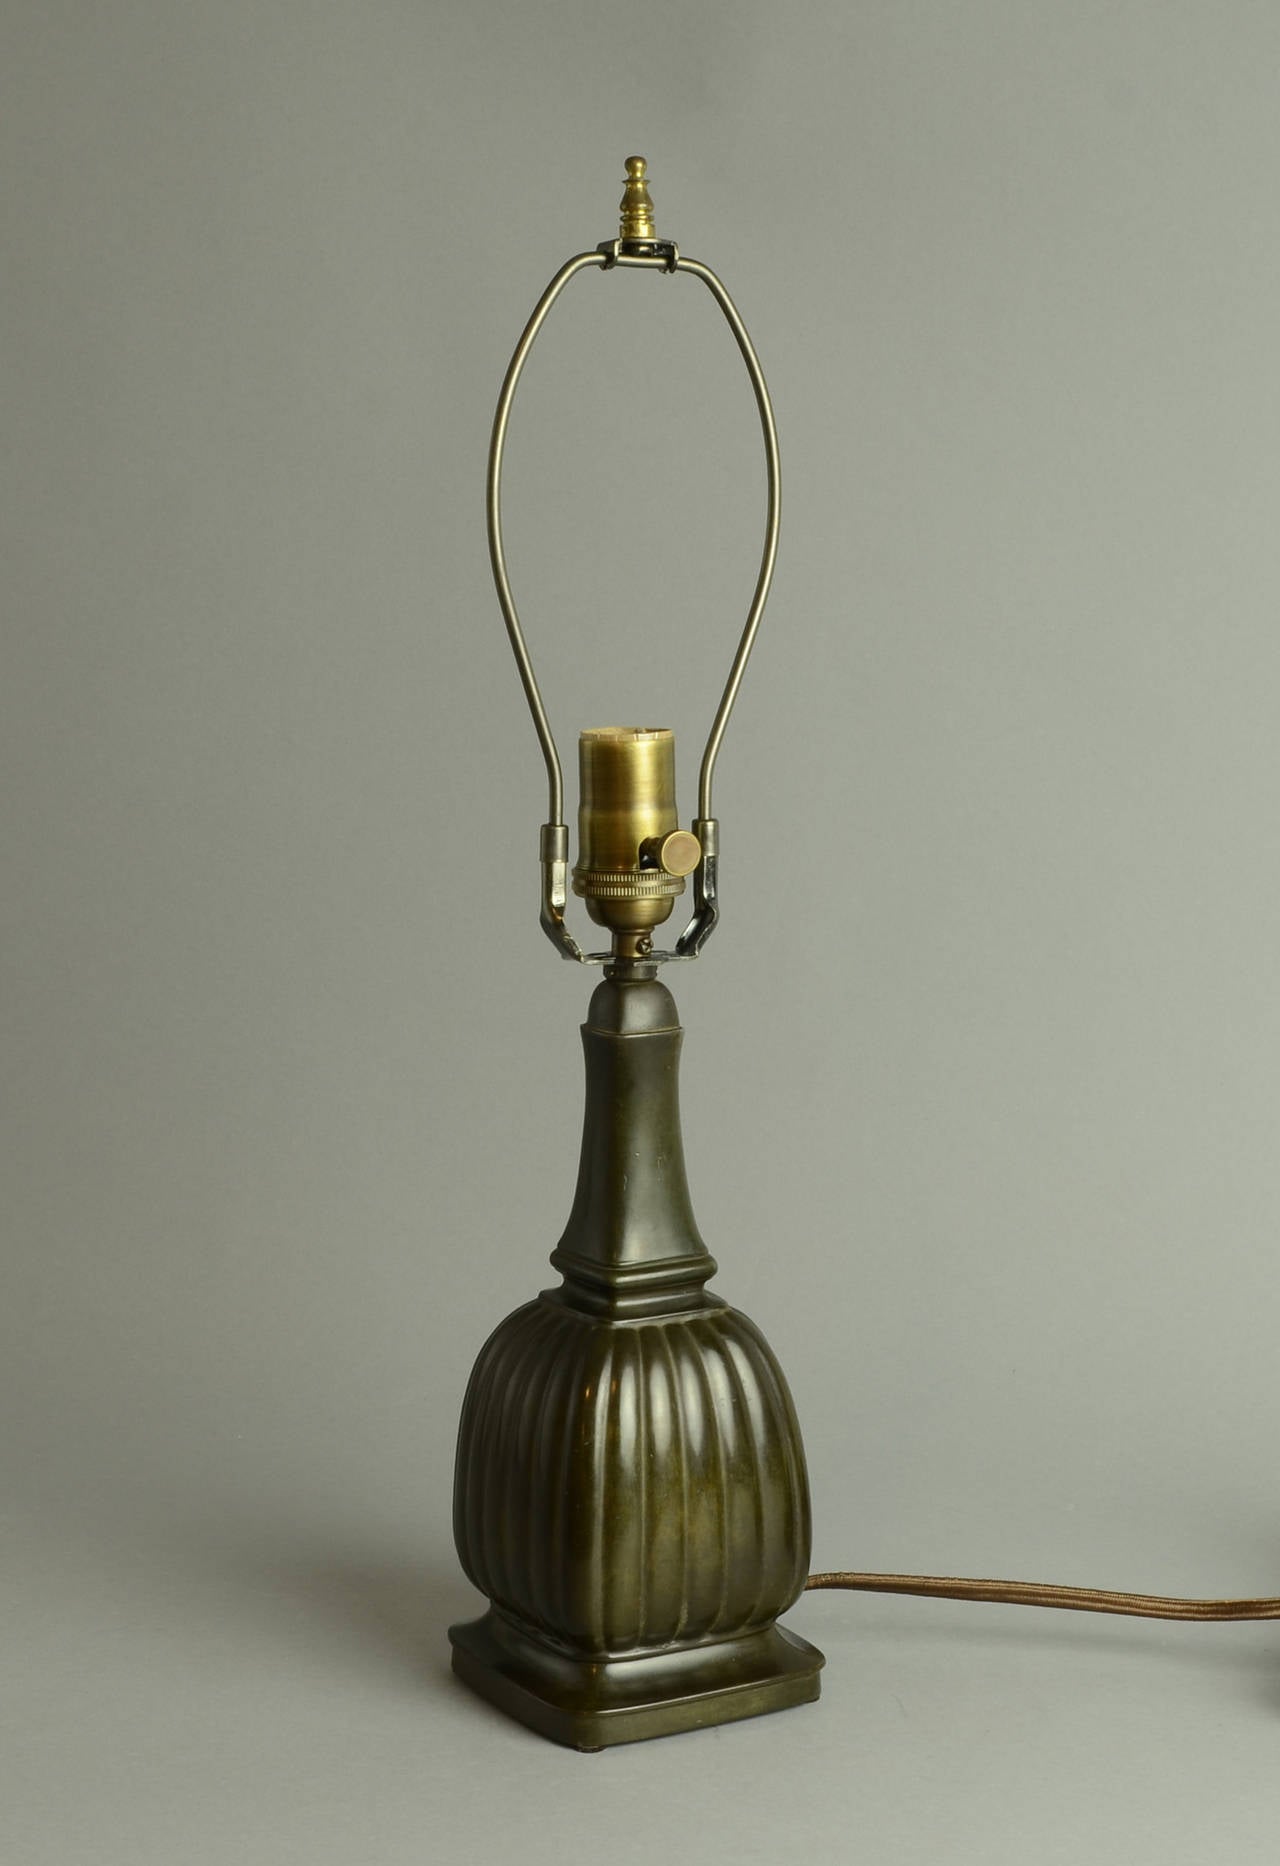 Table lamp in disko metal, c. 1930s. Rewired with antique brass style fittings, and brown fabric cord.